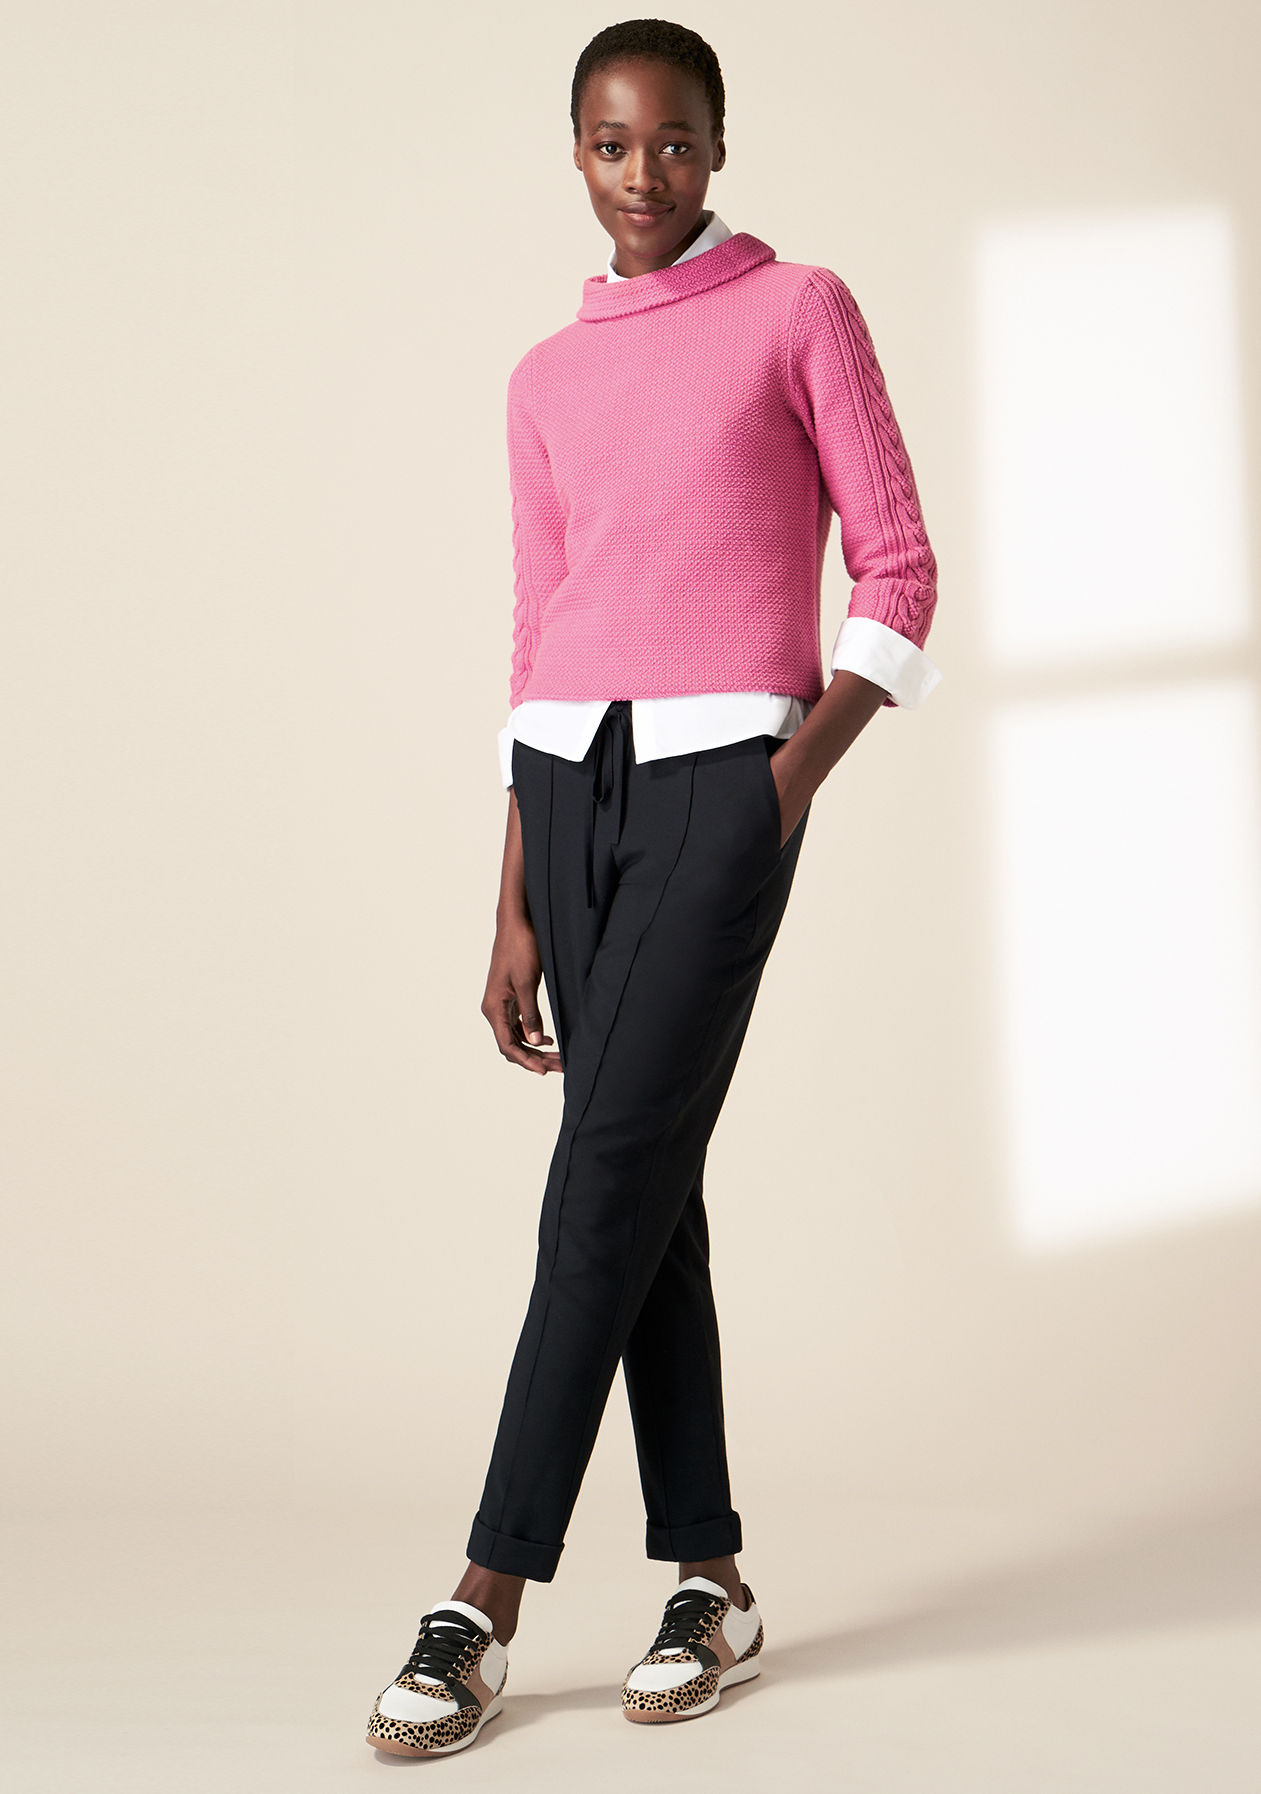 Model photographed wearing a pink knitted jumper with navy joggers and trainers.